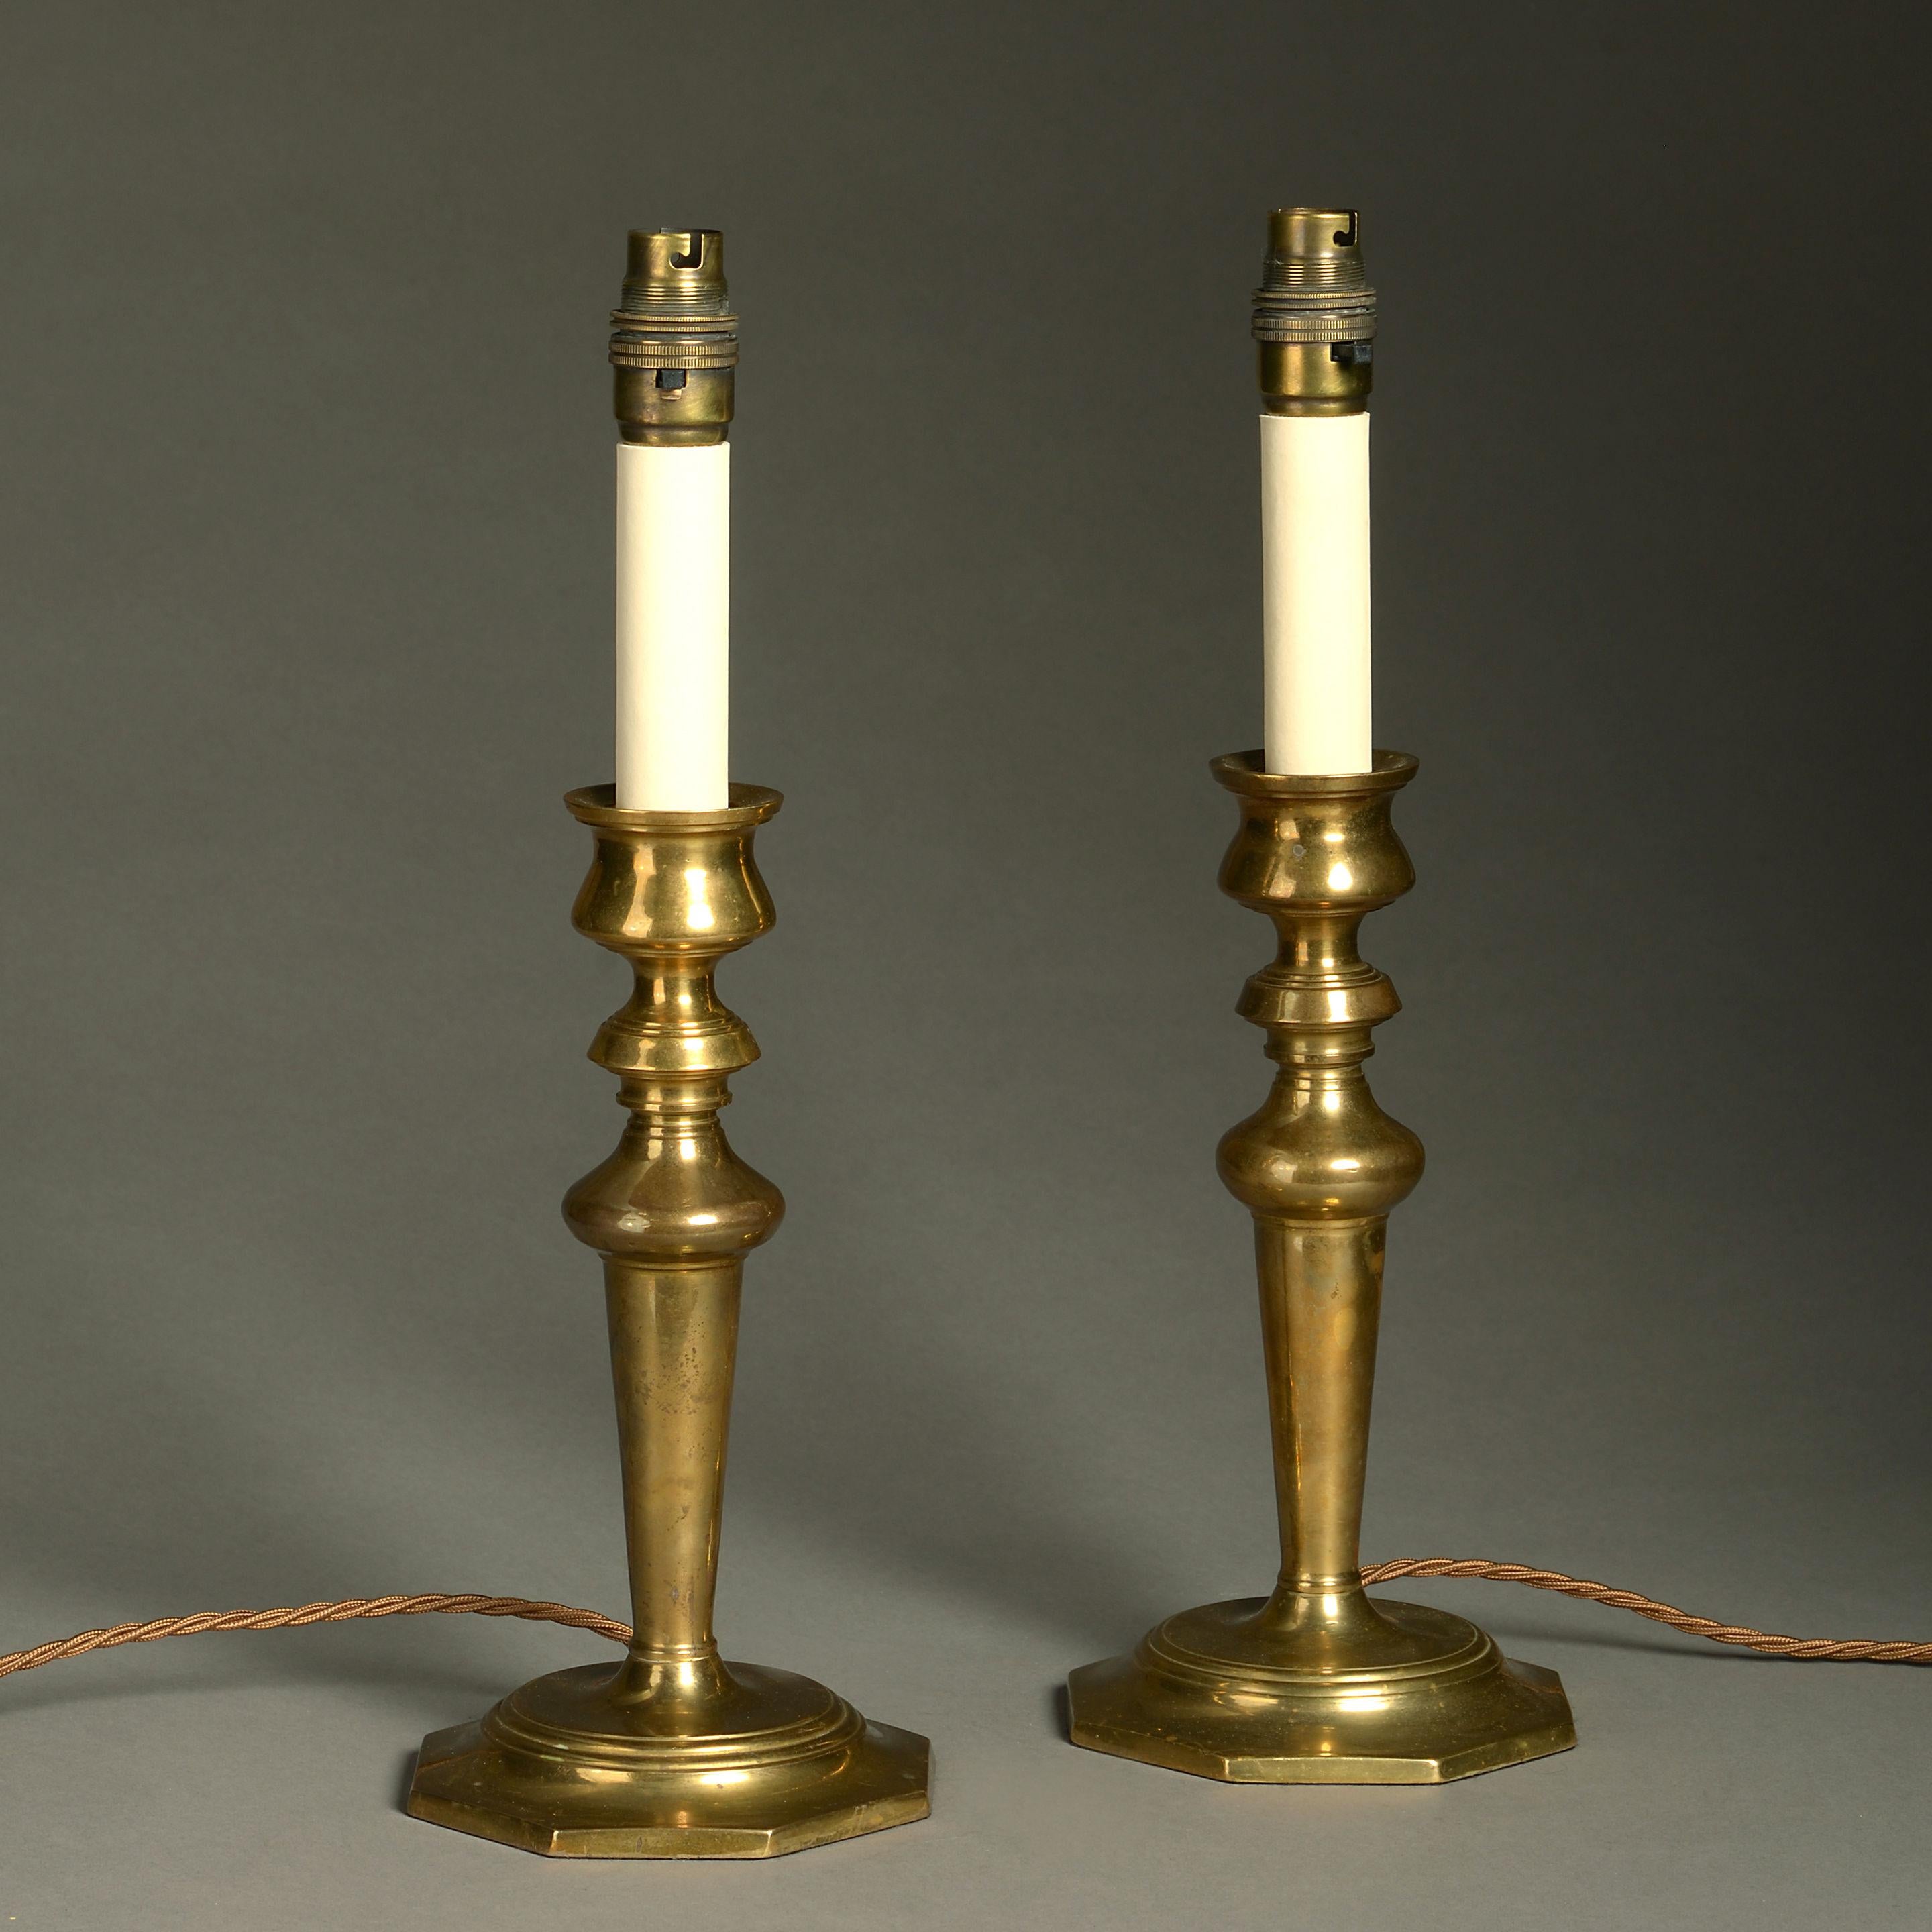 A pair of early 20th century brass candlestick lamps, having turned stems and octagonal bases. 

Dimensions refer to bases excluding electrical elements and faux candleholders.